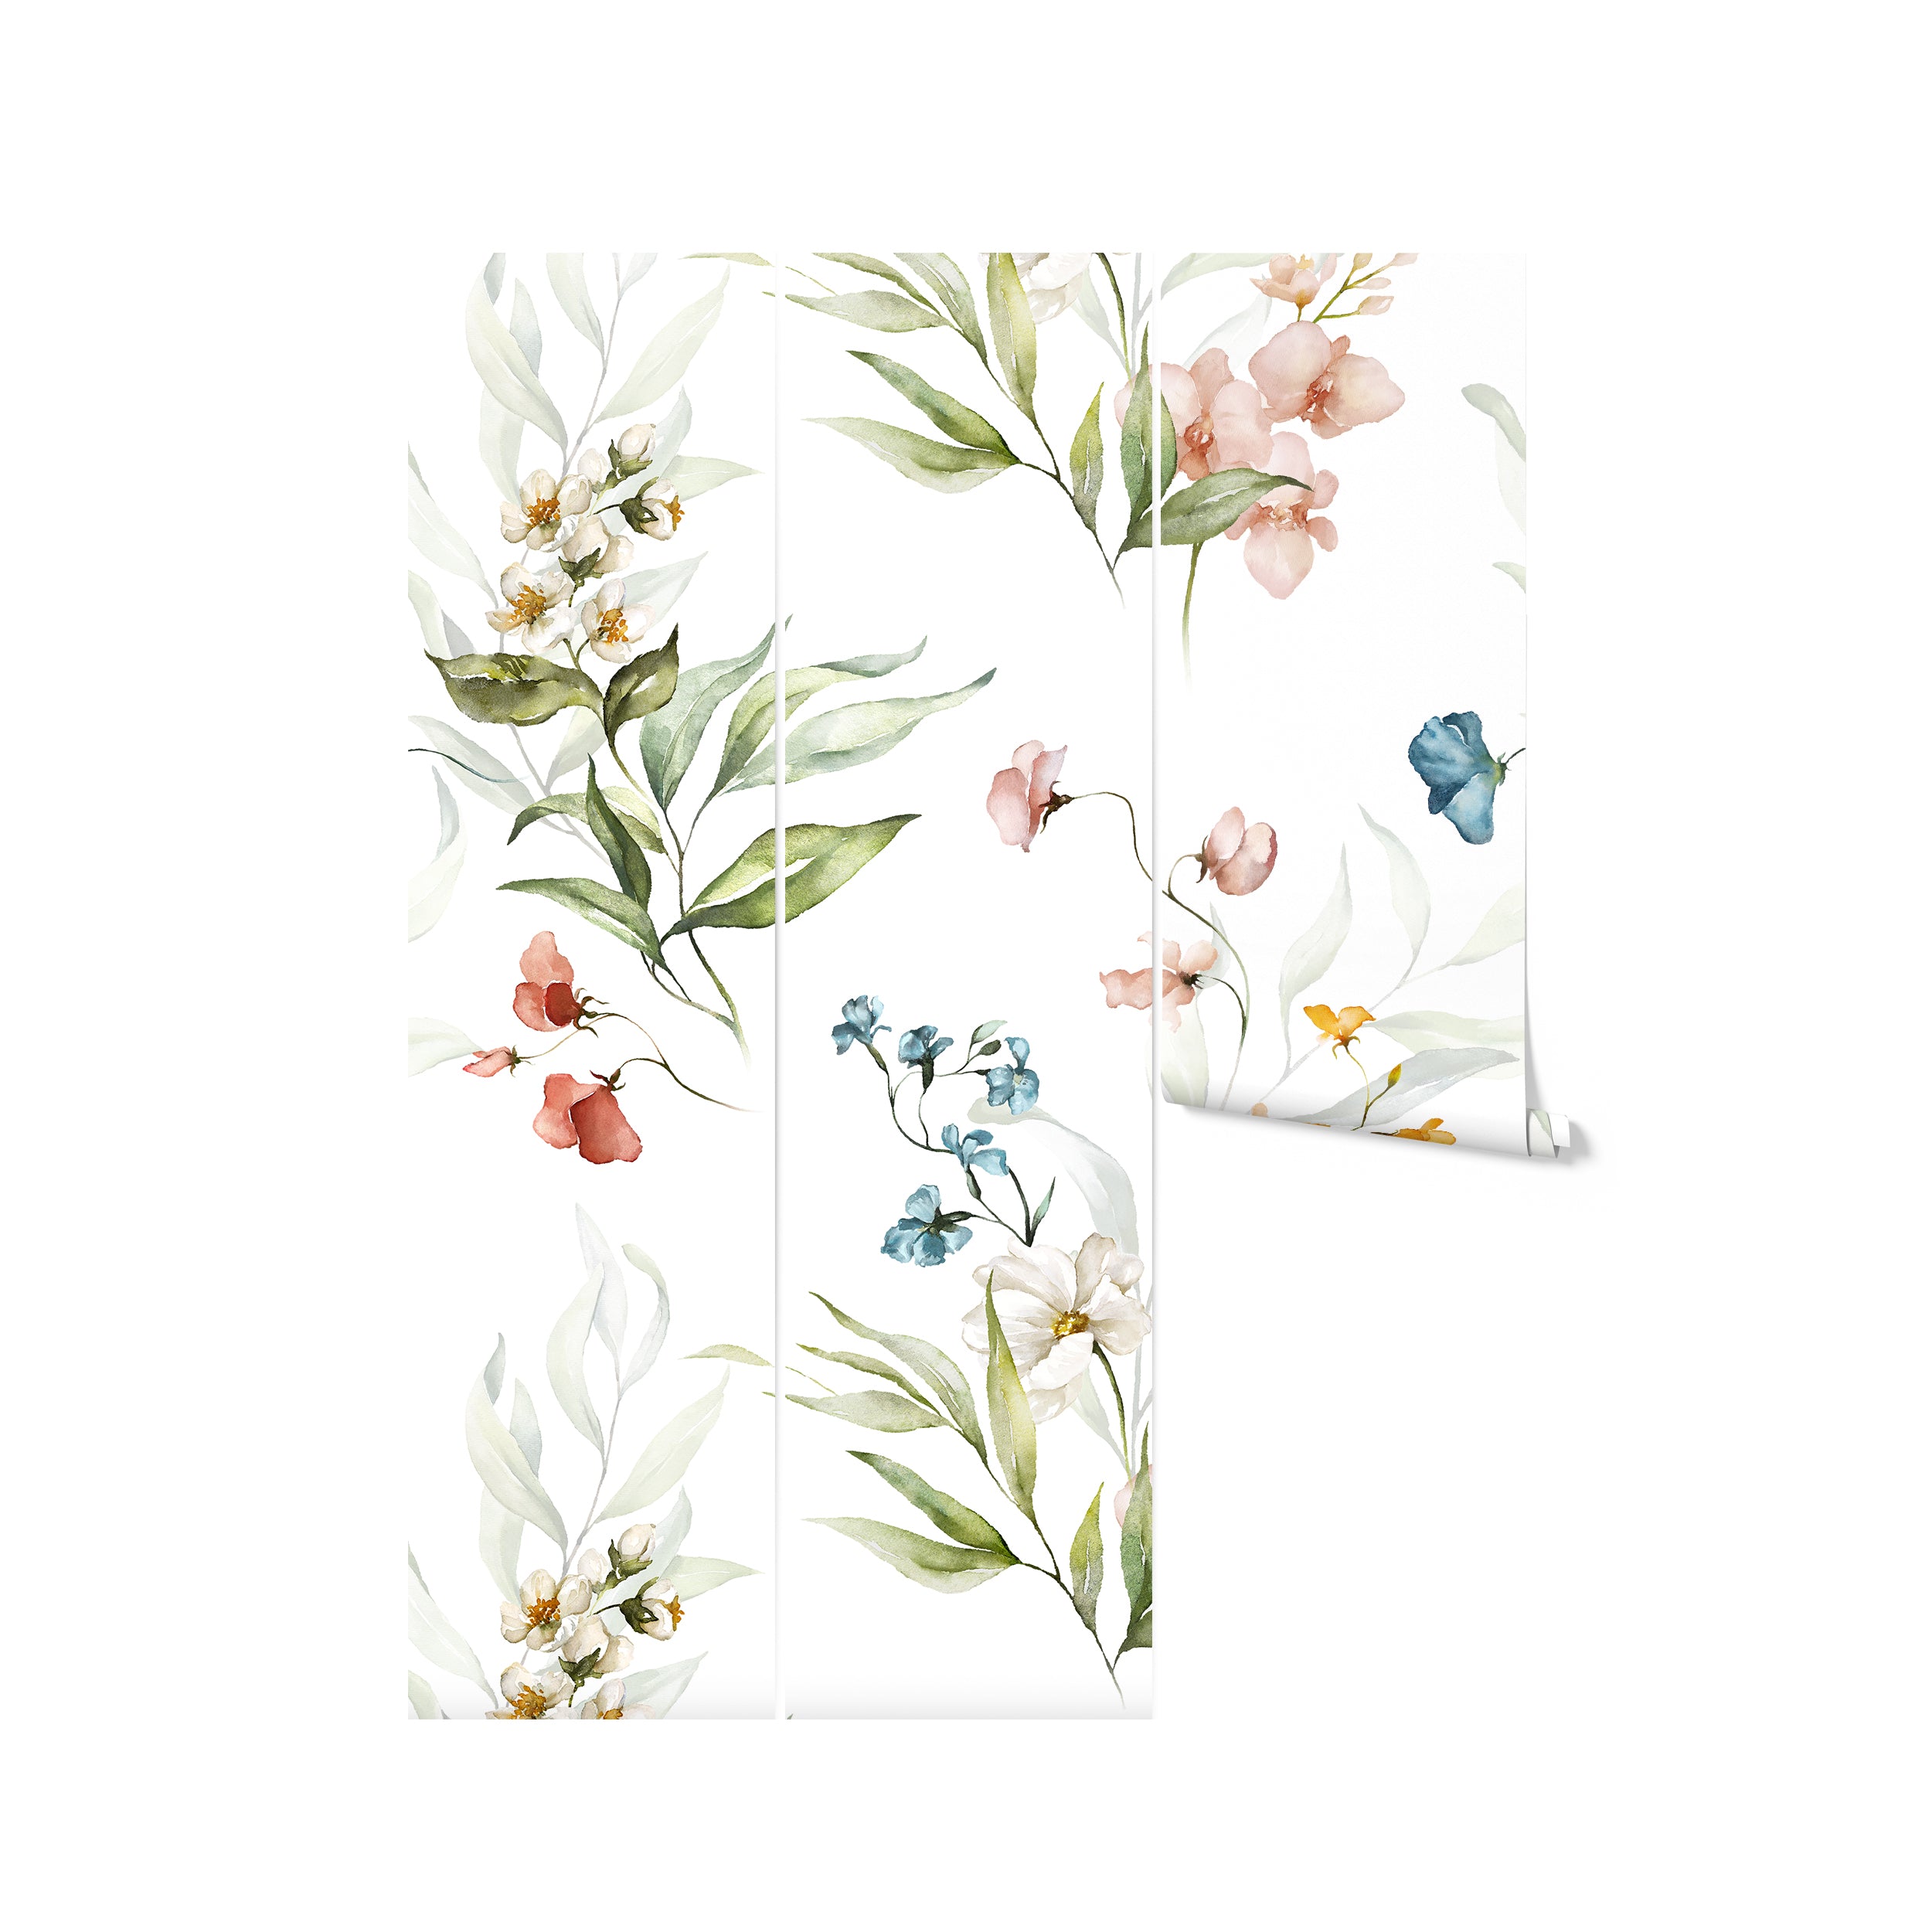 A roll of floral wallpaper with a watercolor design of flowers and leaves. The pattern displays soft pink, blue, yellow, and white flowers with green foliage on a white background, giving a fresh and artistic feel to any space.